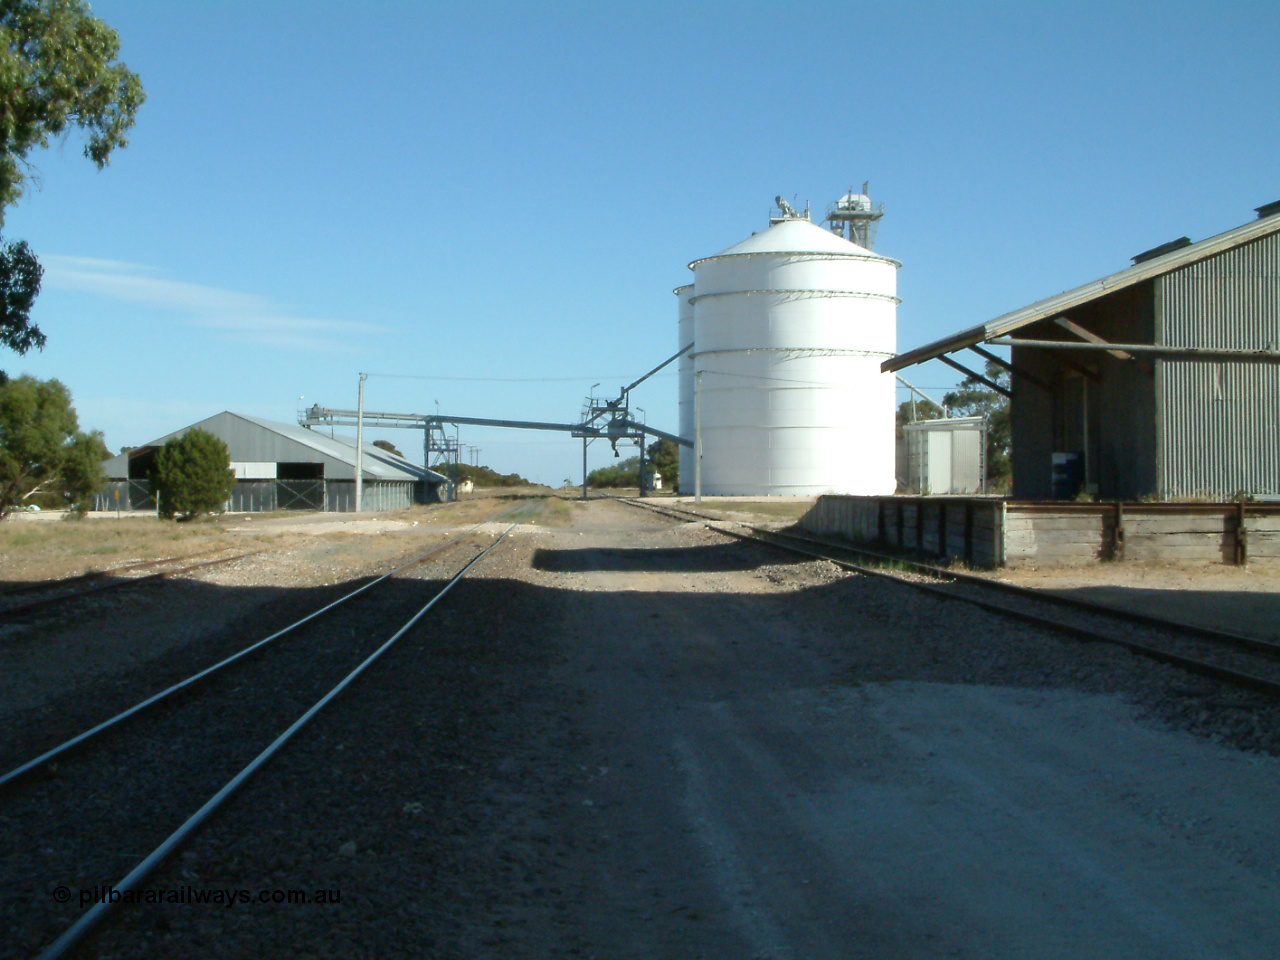 030405 155511
Lock, yard overview looking south along the mainline, horizontal grain shed with siding on the left, Ascom style silo complex Block 5 with outflow spout on the right with goods shed and platform also visible. 5th April 2003.
